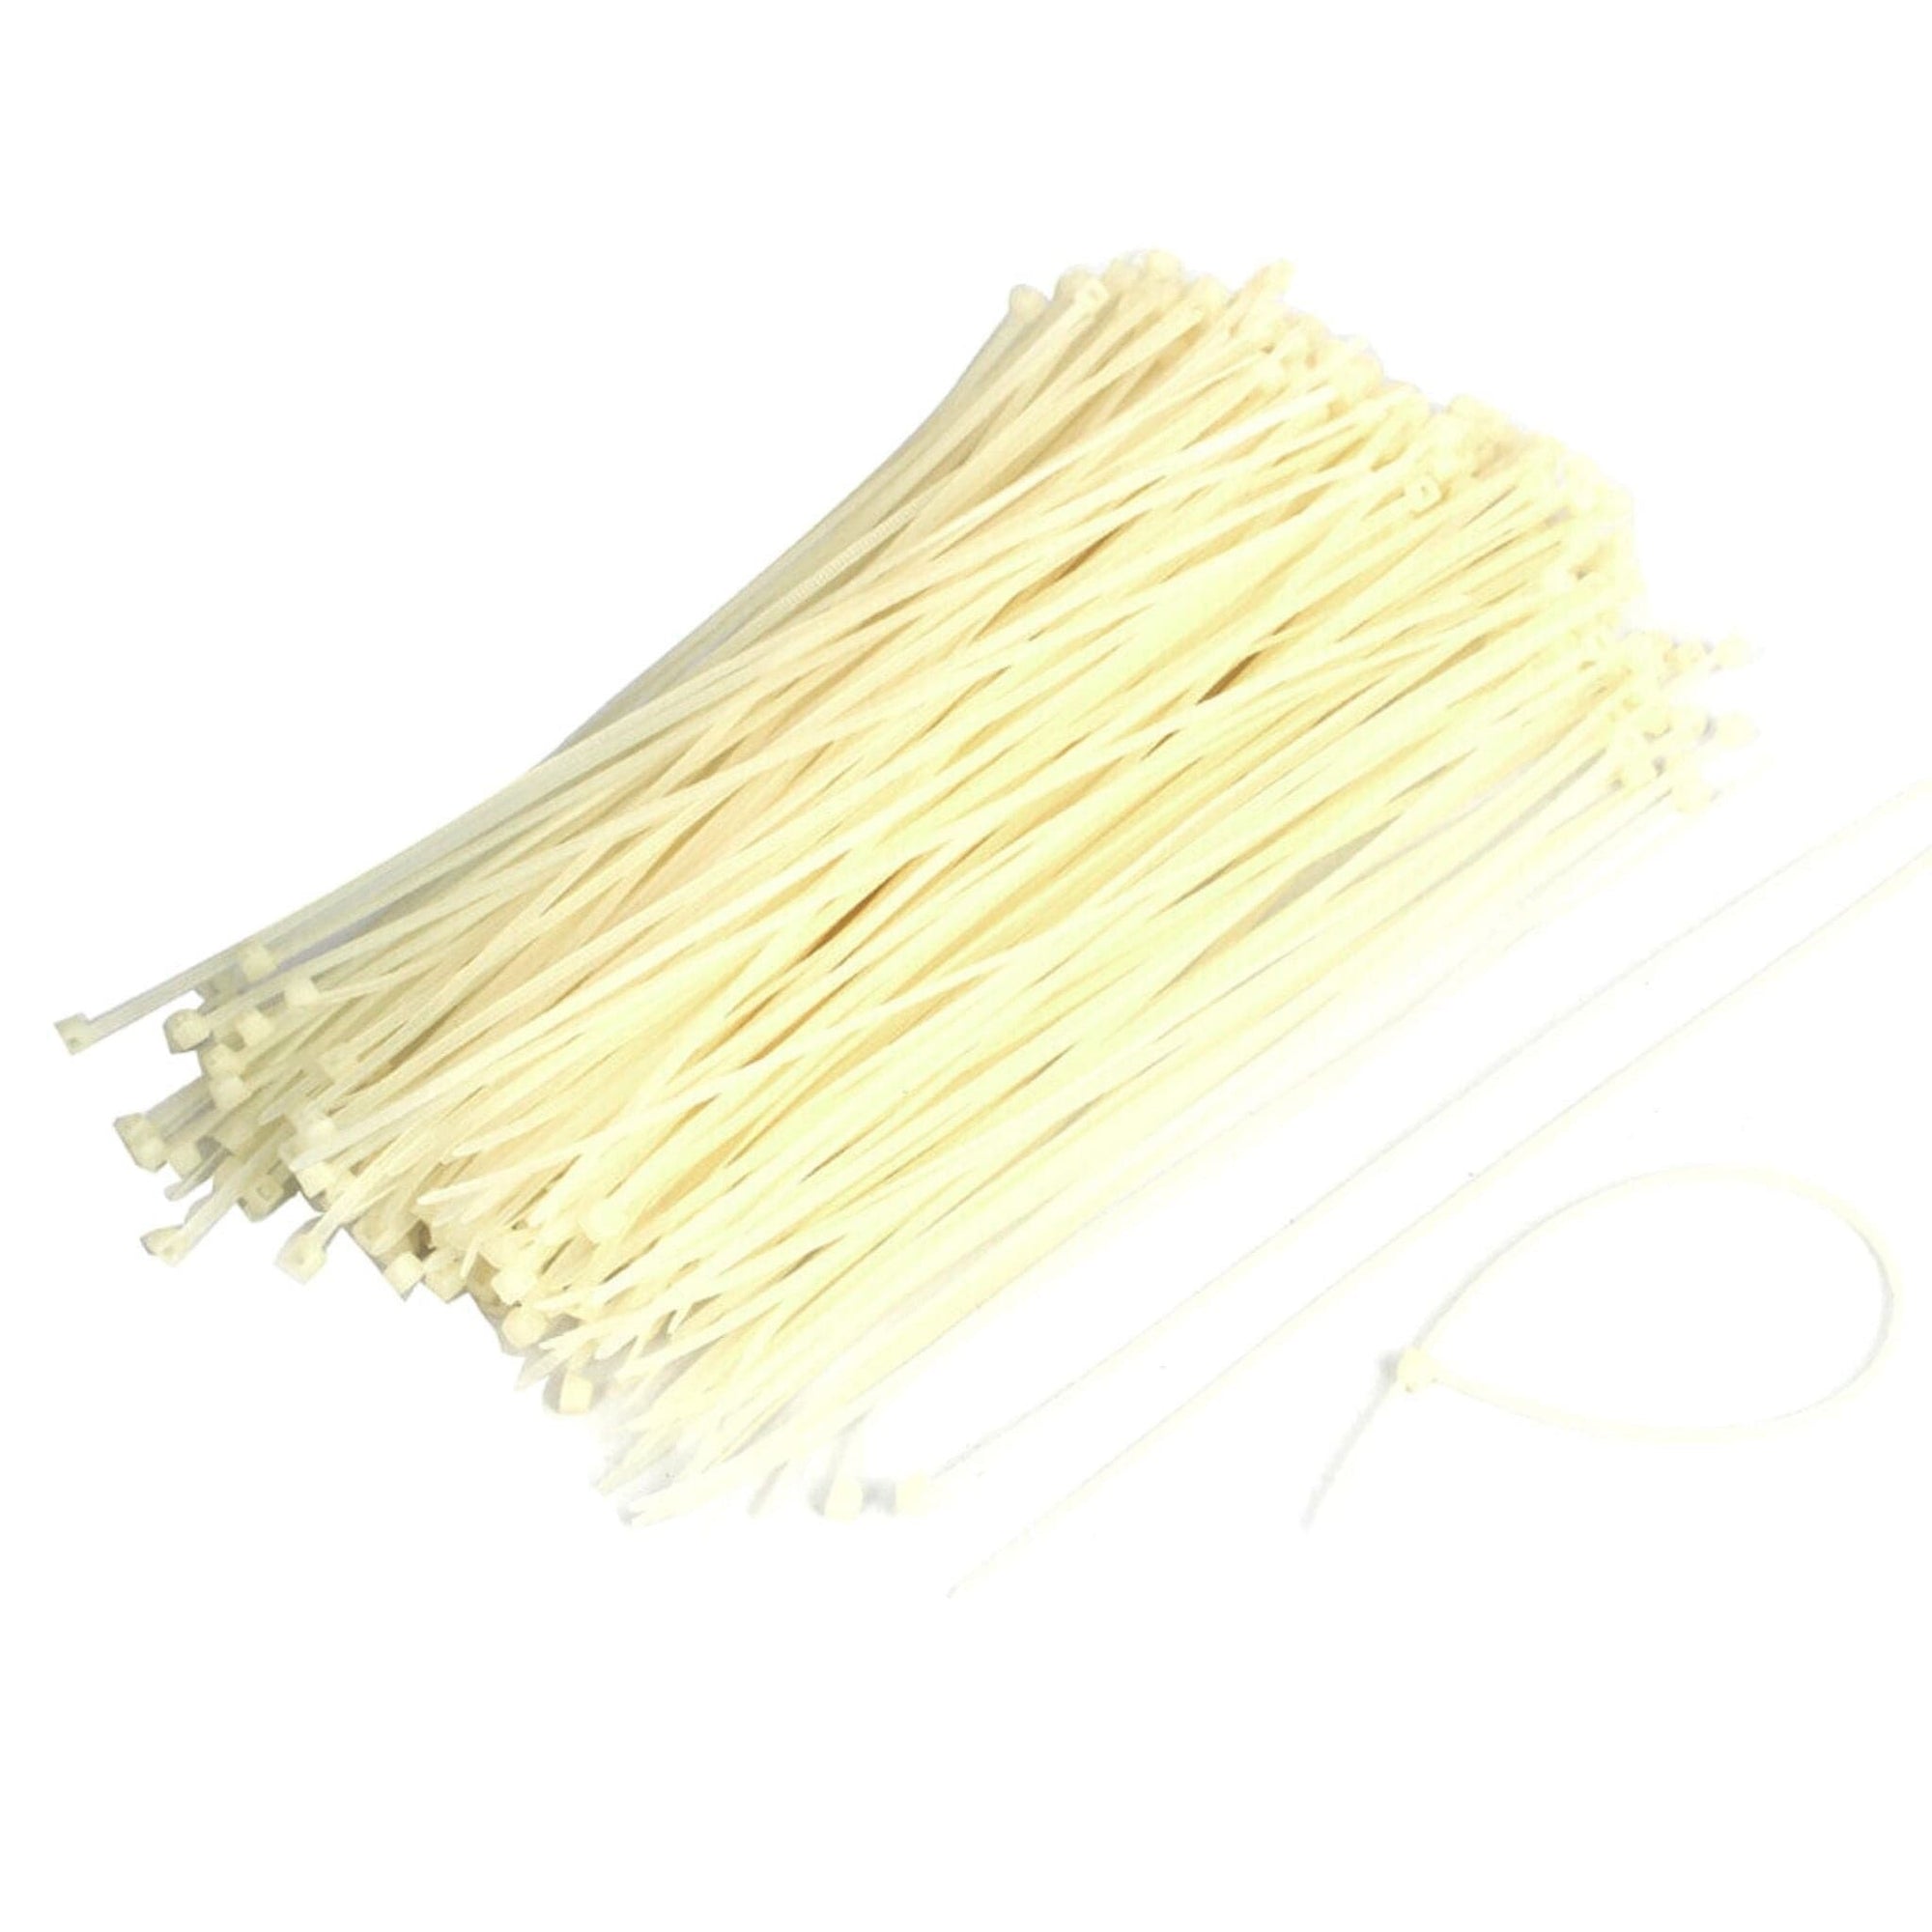 White Natural Cable Ties - 100 Pack (3.6mm x 150mm) - South East Clearance Centre